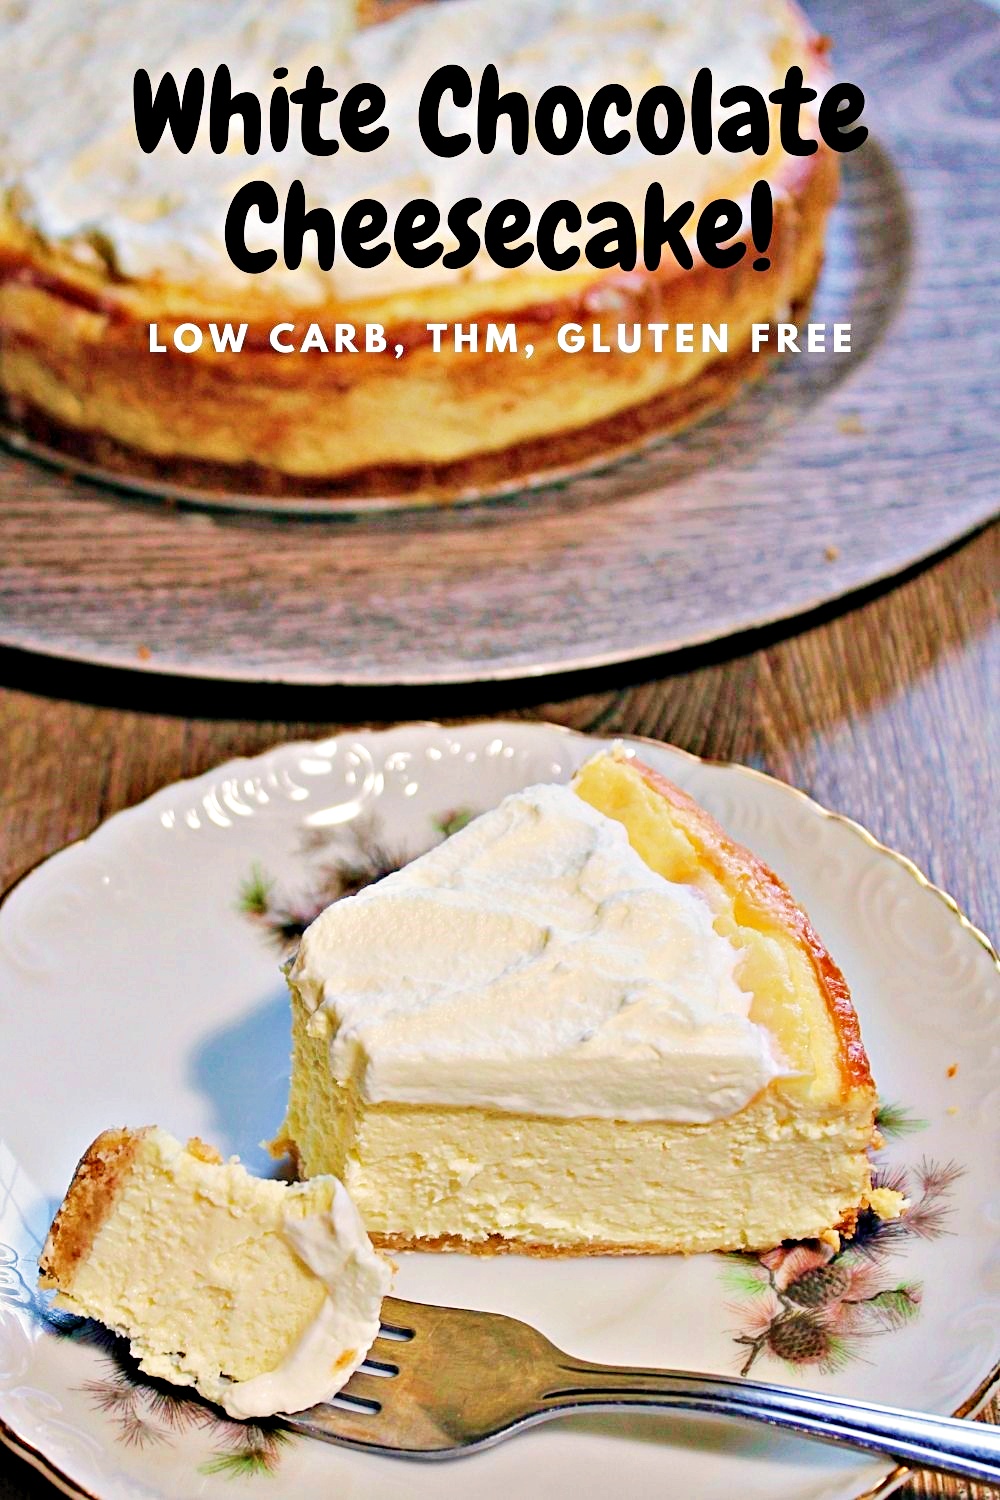 Keto & THM White Chocolate Cheesecake is a delicious sugar free cheesecake great for special occasions. 